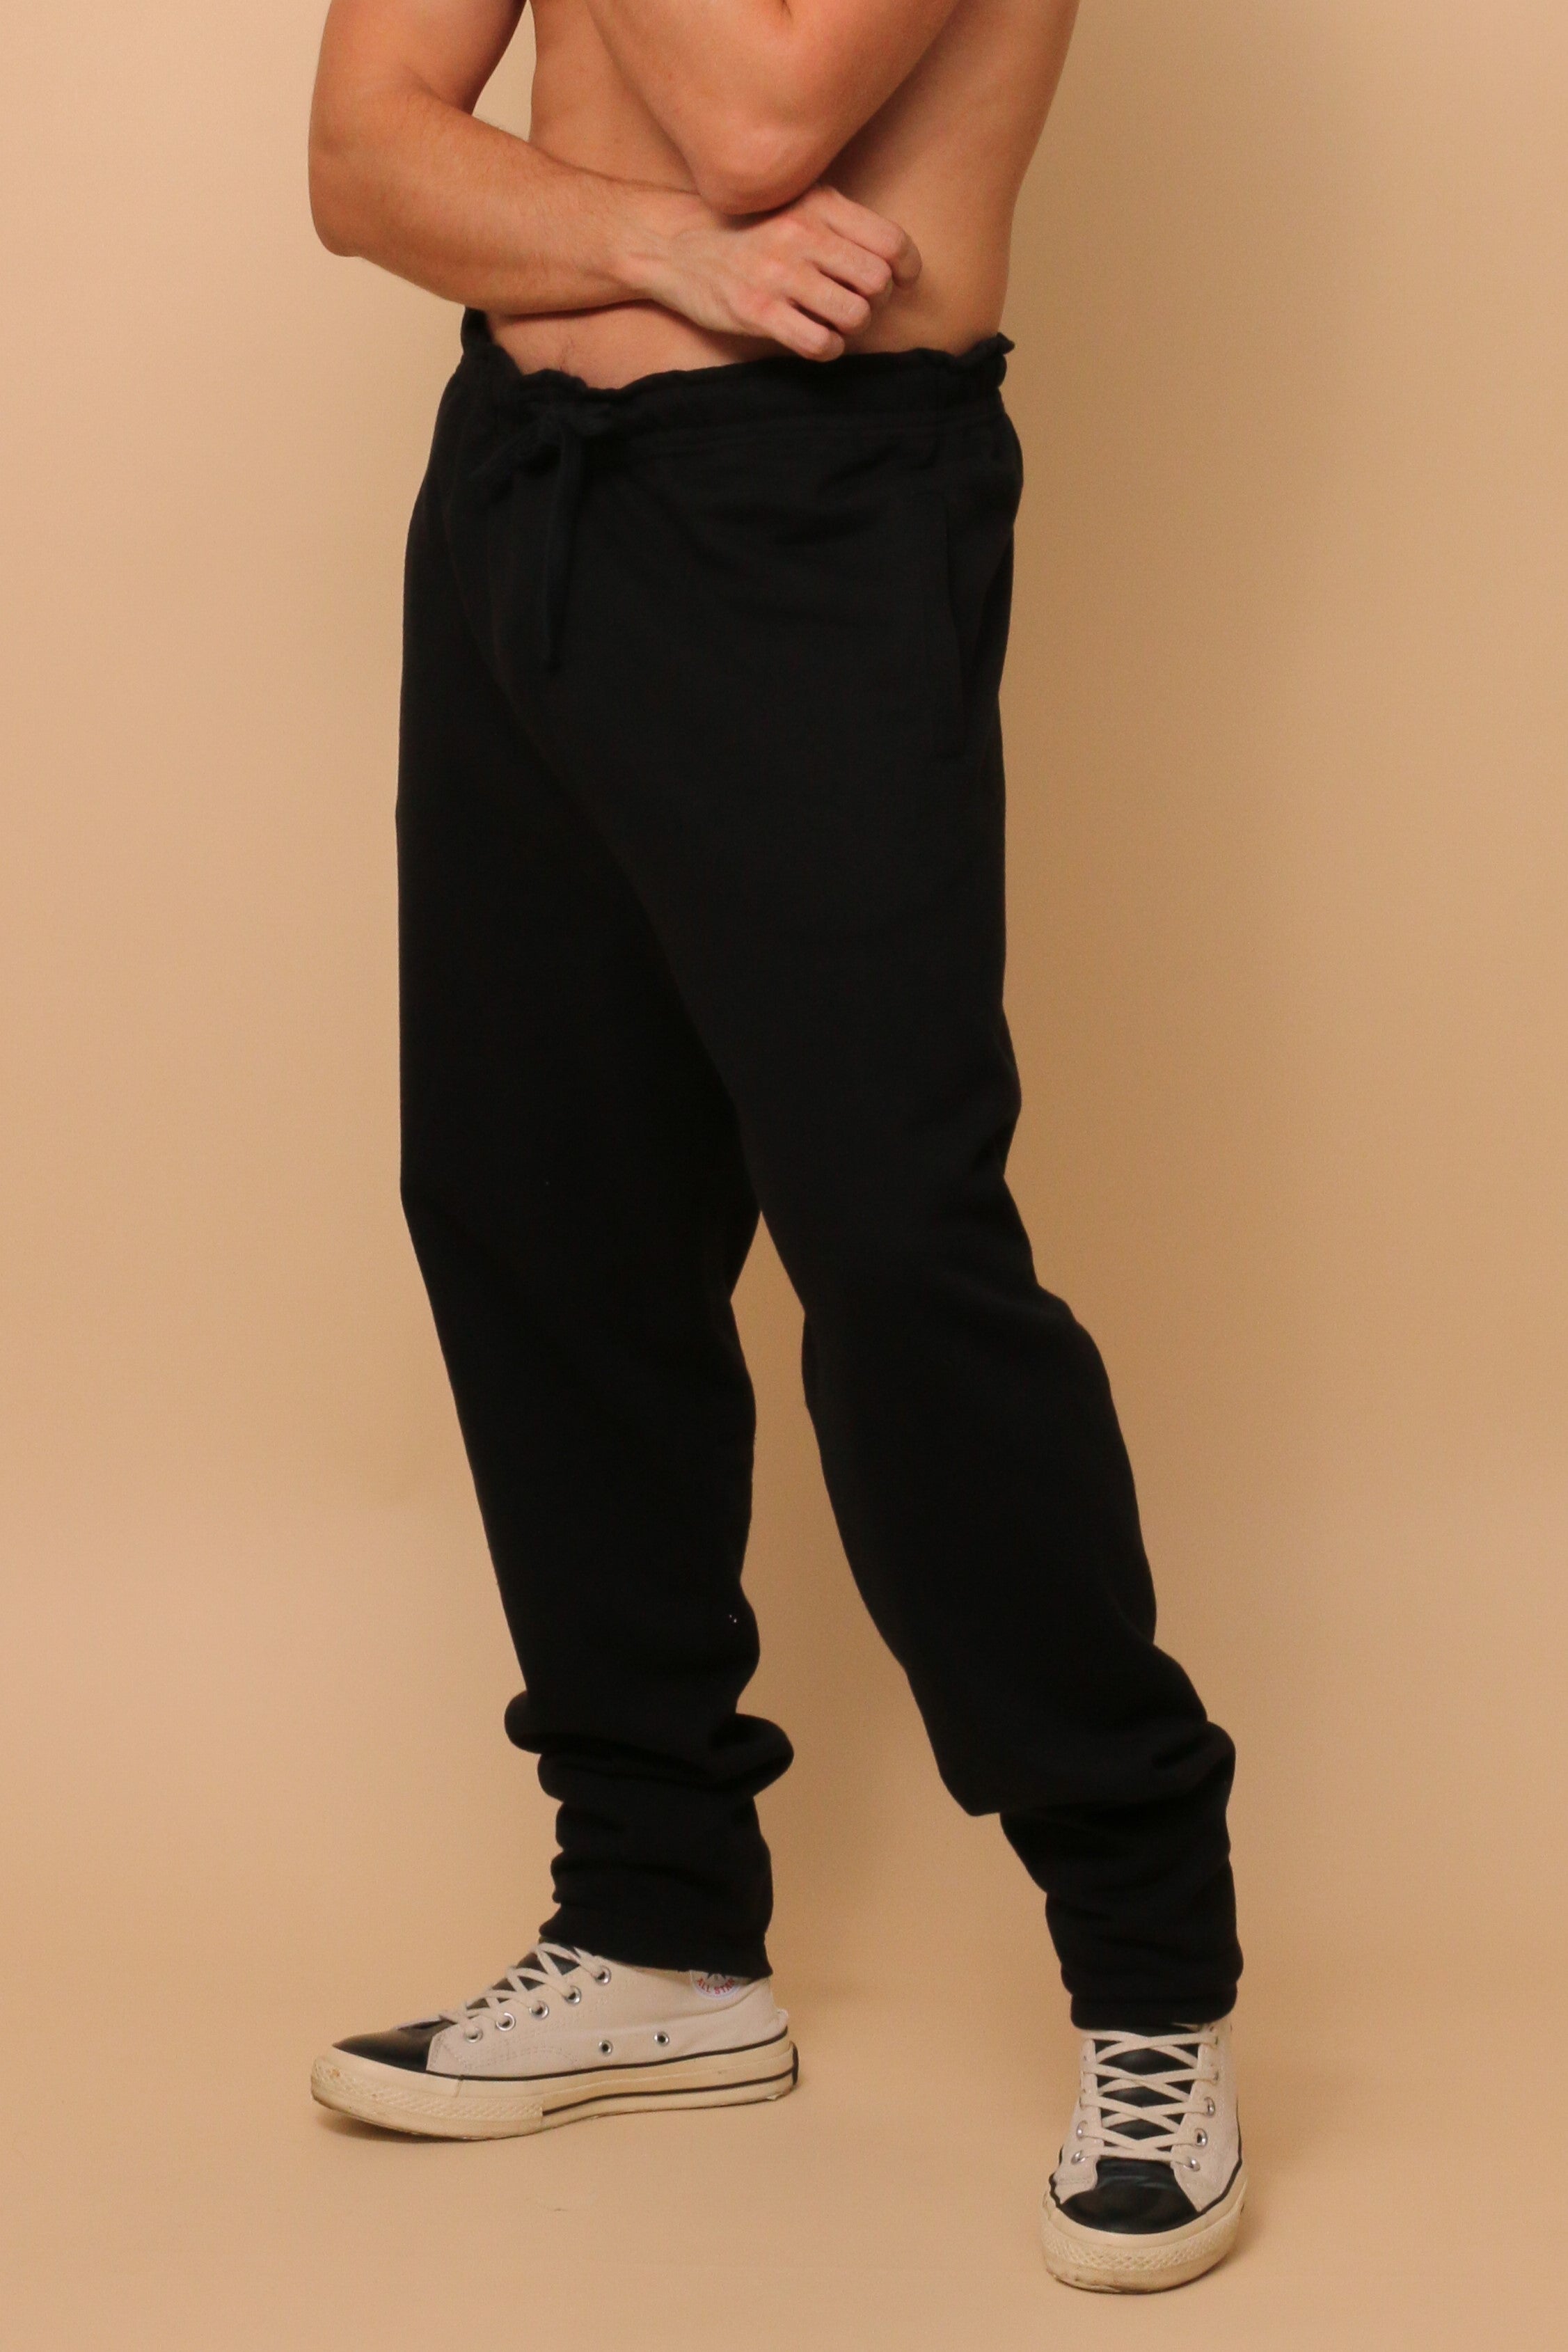 Men's Allergy-Free French Terry Elasticized Jogger Sweatpants with Drawstrings